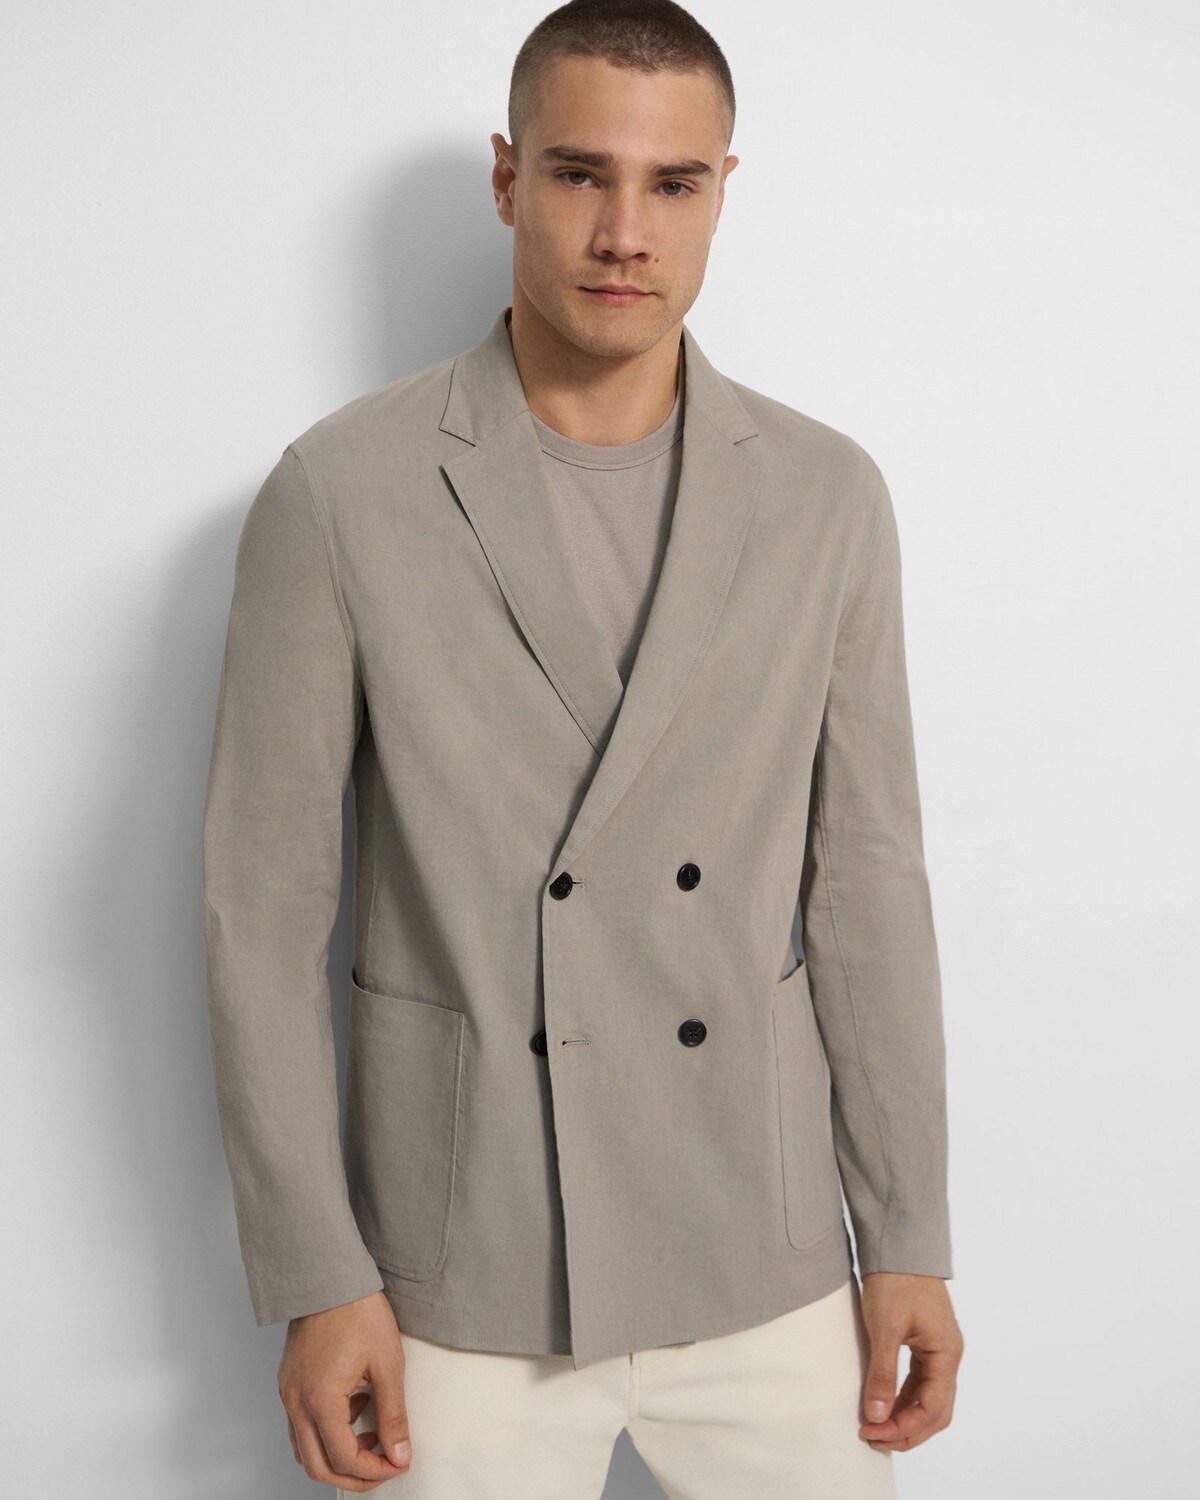 Clinton Double-Breasted Blazer in Good Linen